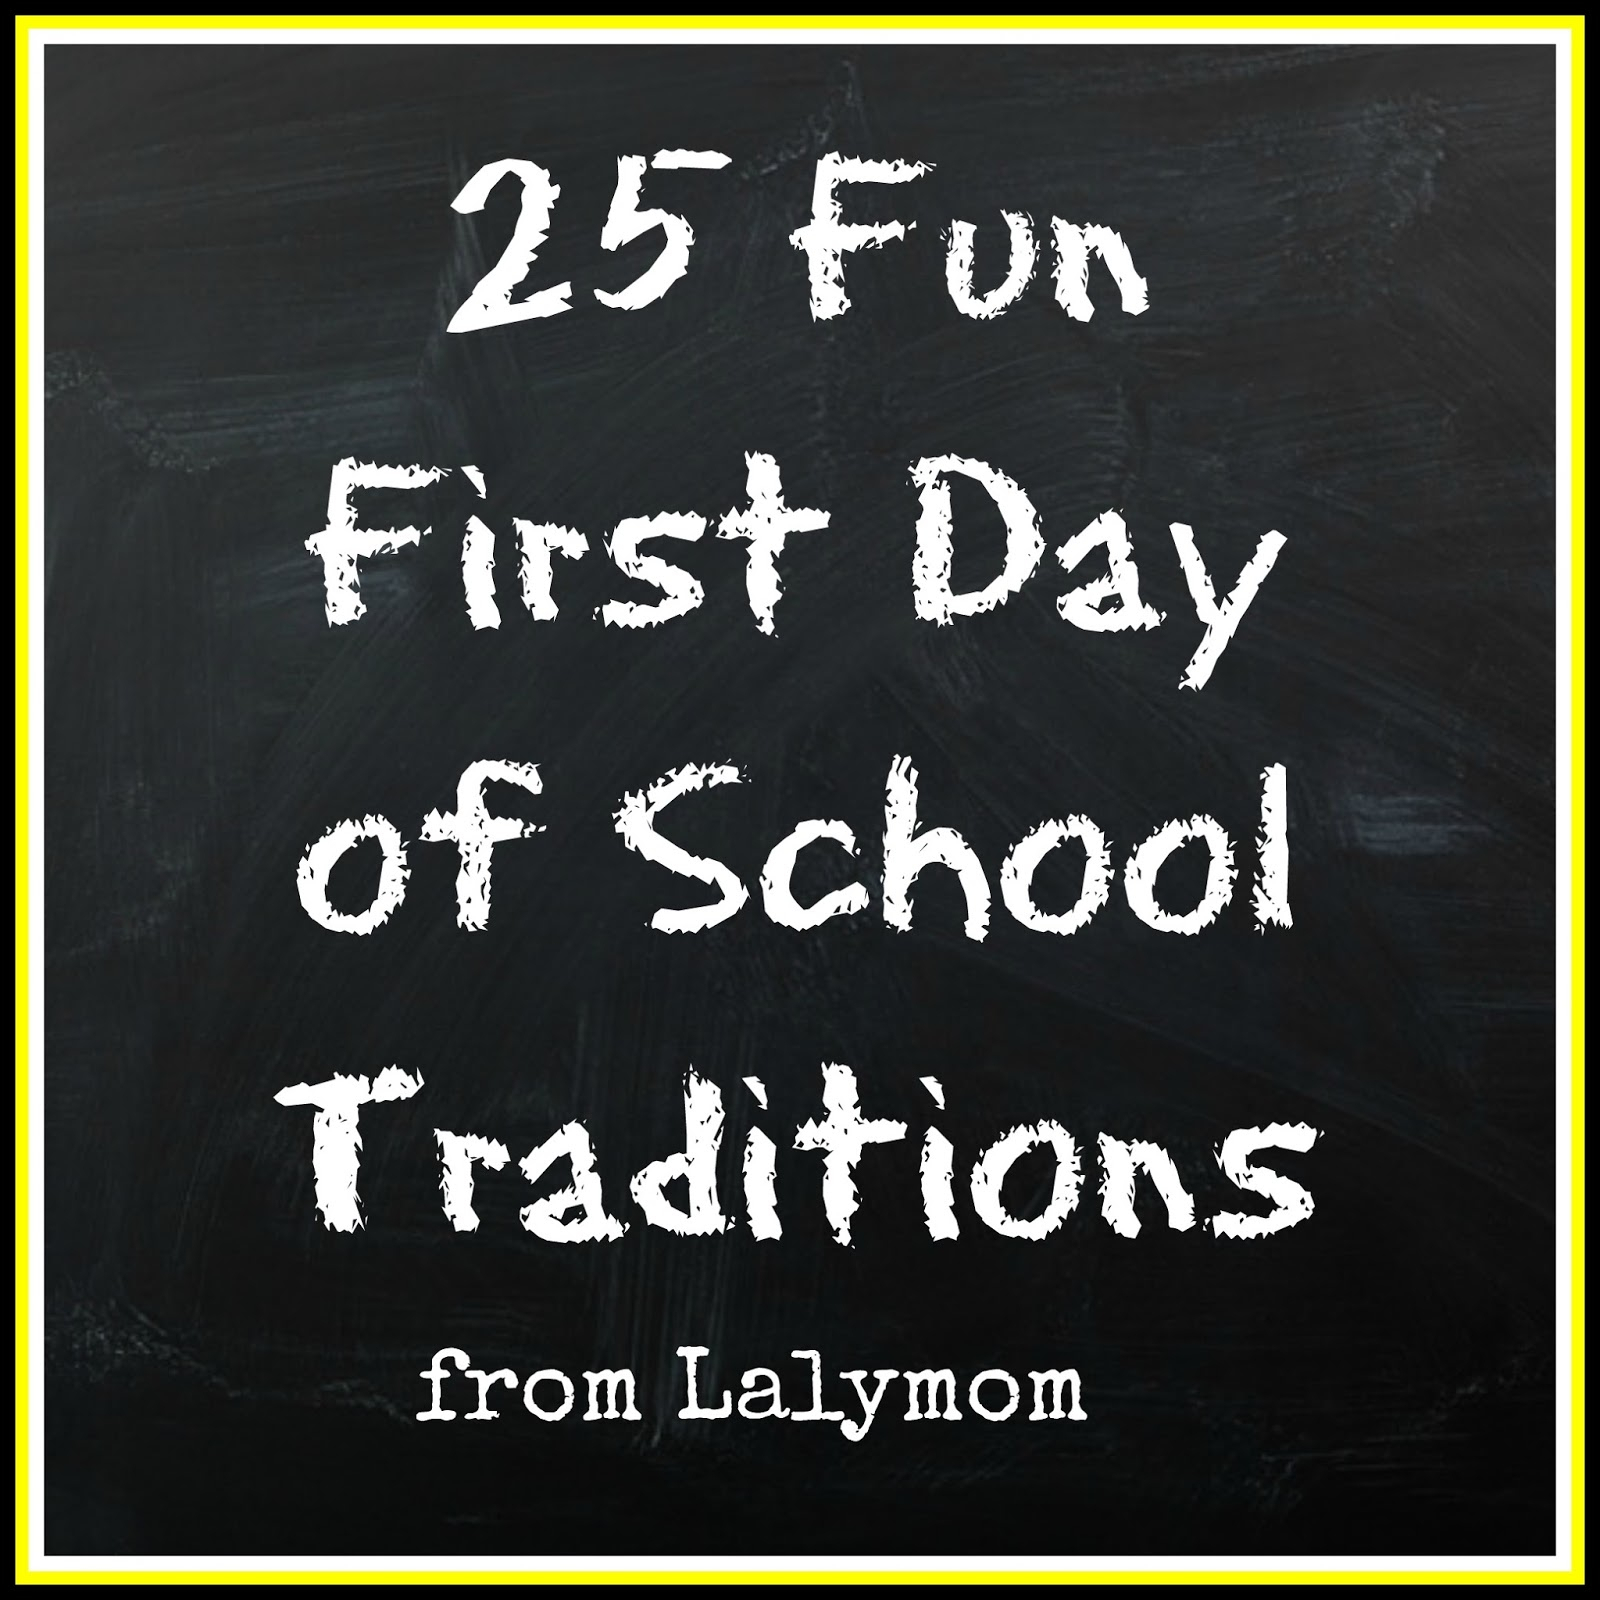 10 Ideal Ideas For First Day Of Preschool 25 fun first day of school traditions lalymom 2024